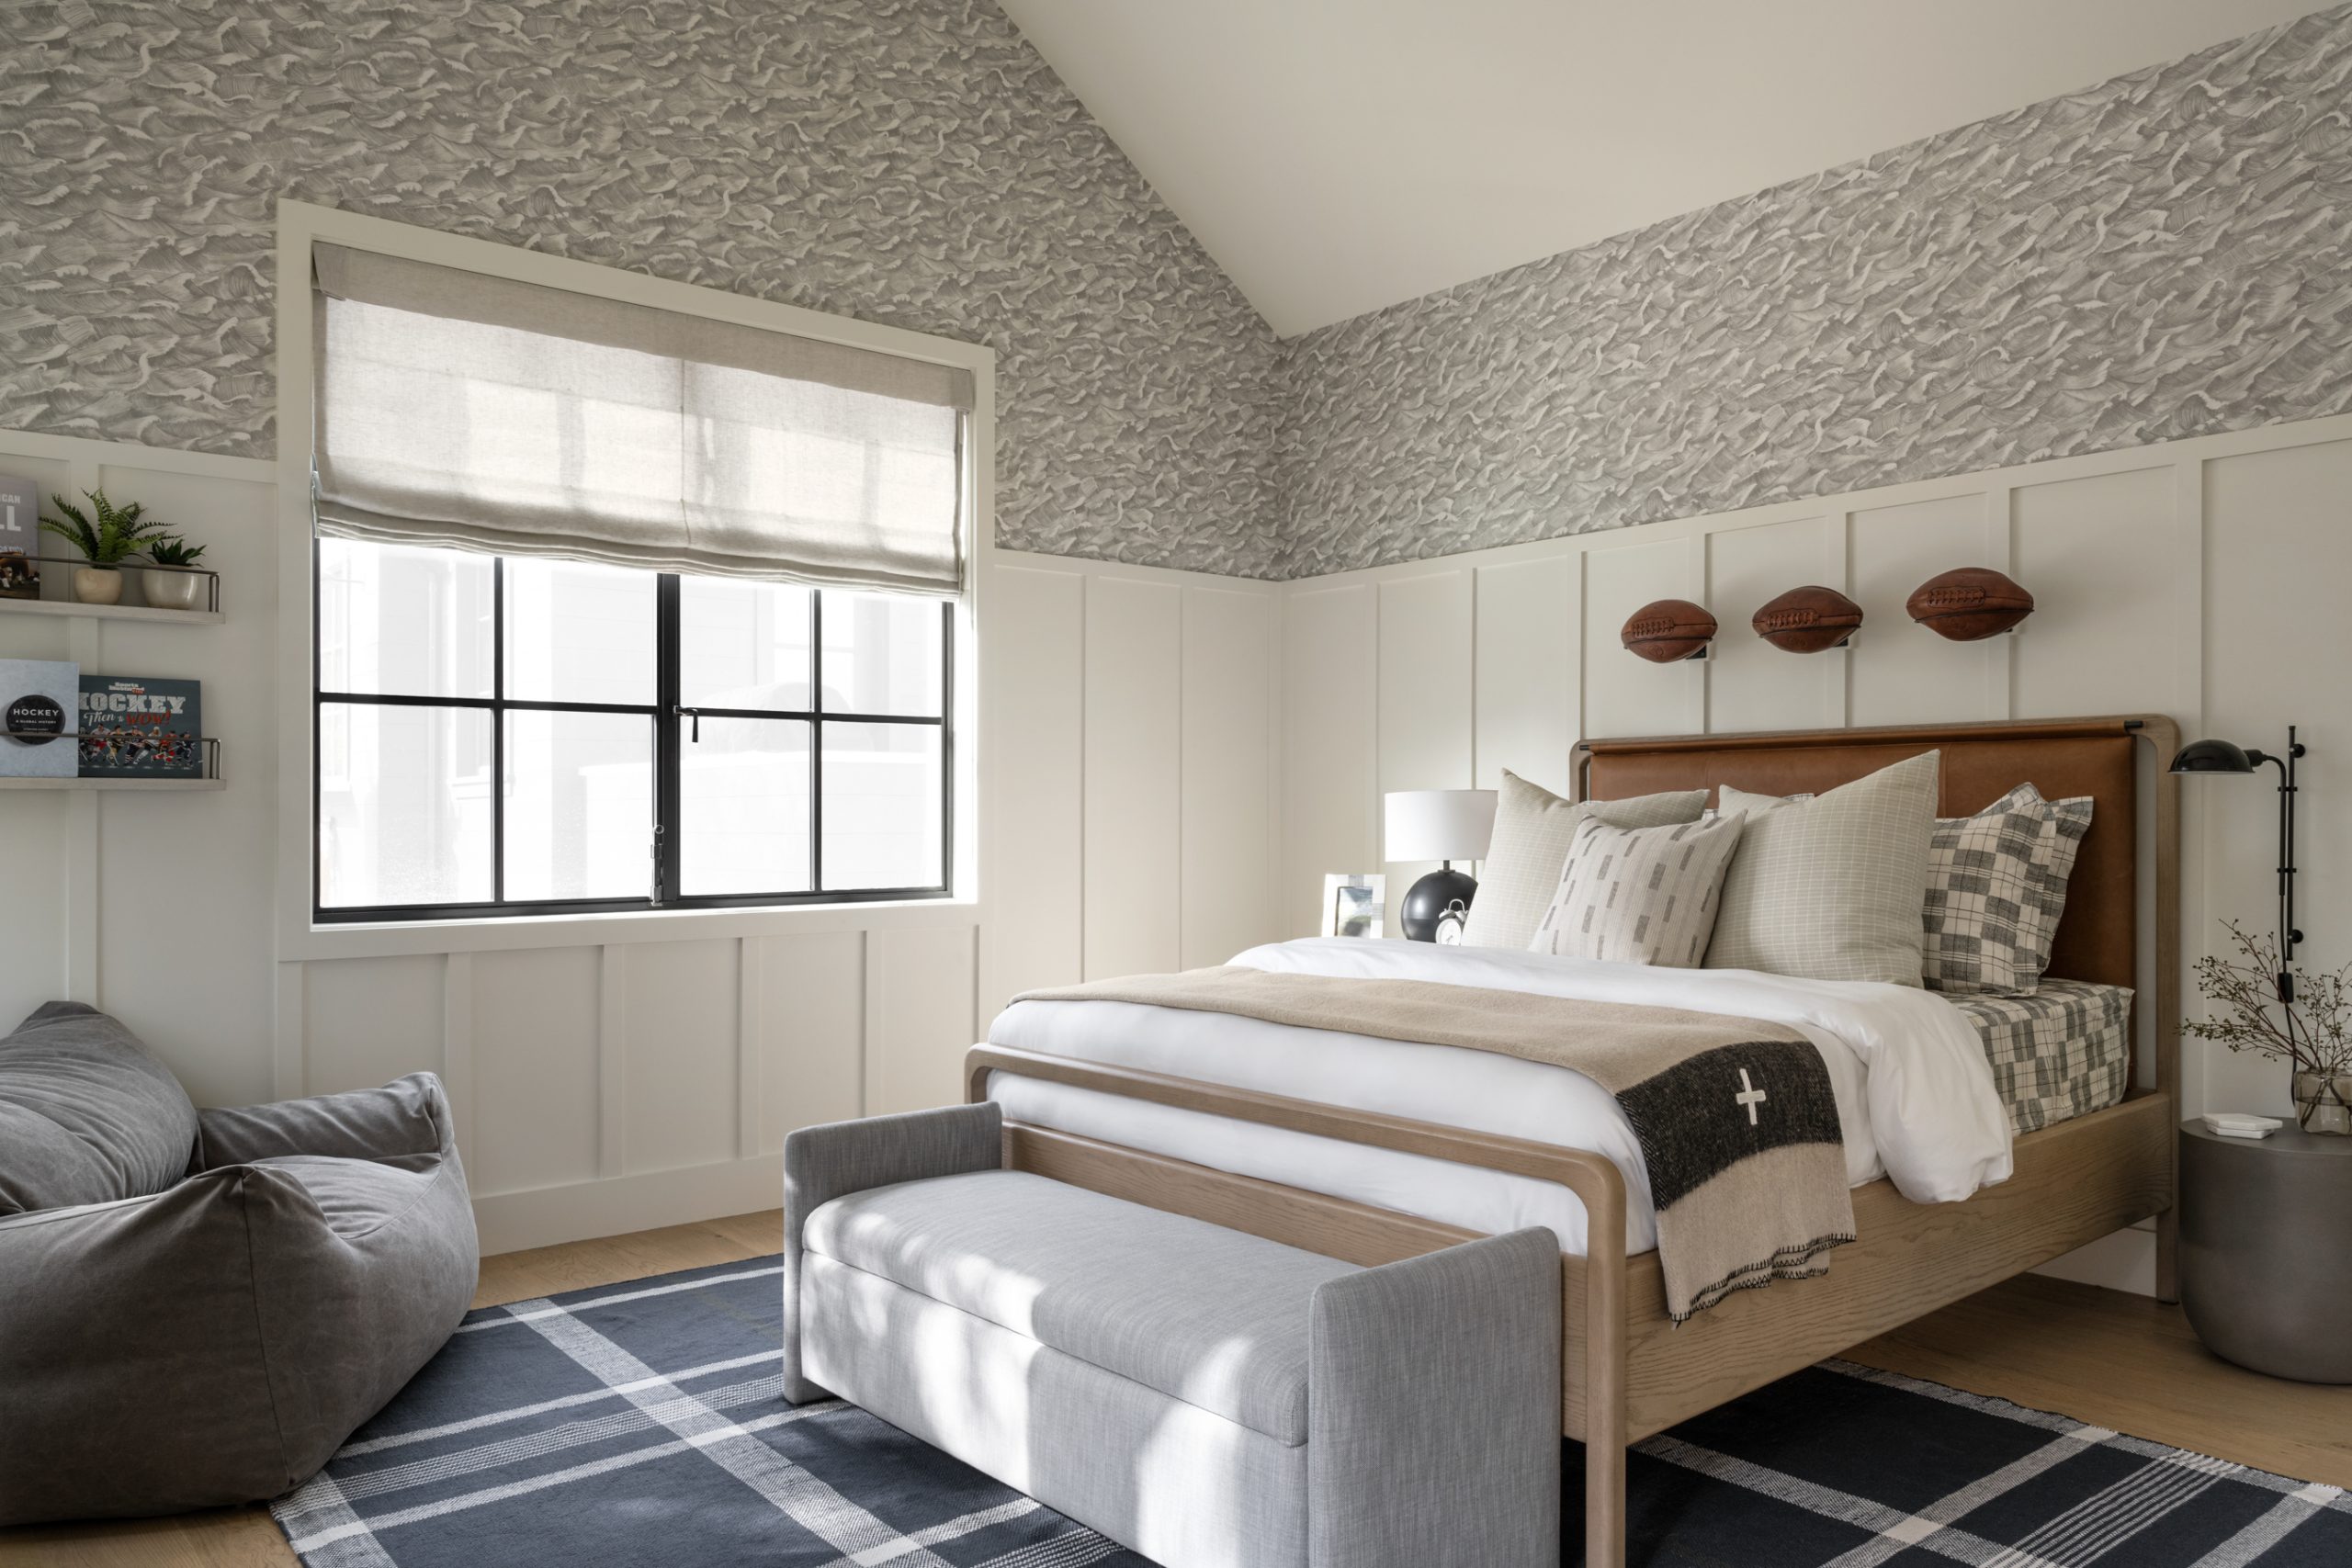 bedroom with wallpaper and paneled wood with leather bed and footballs hanging above